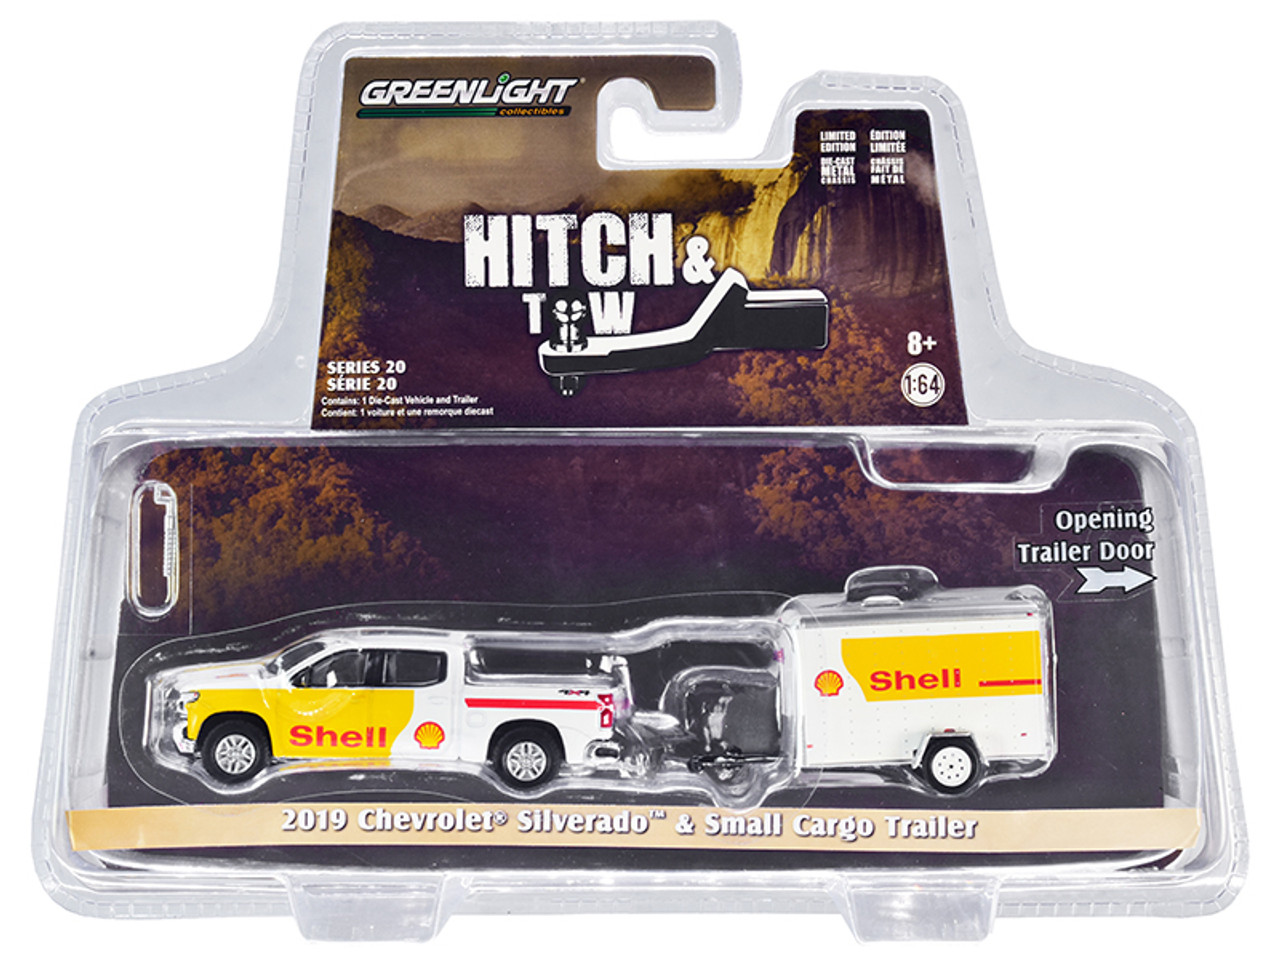 2019 Chevrolet Silverado 4x4 Pickup Truck and Small Cargo Trailer White and Yellow "Shell Oil" "Hitch & Tow" Series 20 1/64 Diecast Model Car by Greenlight